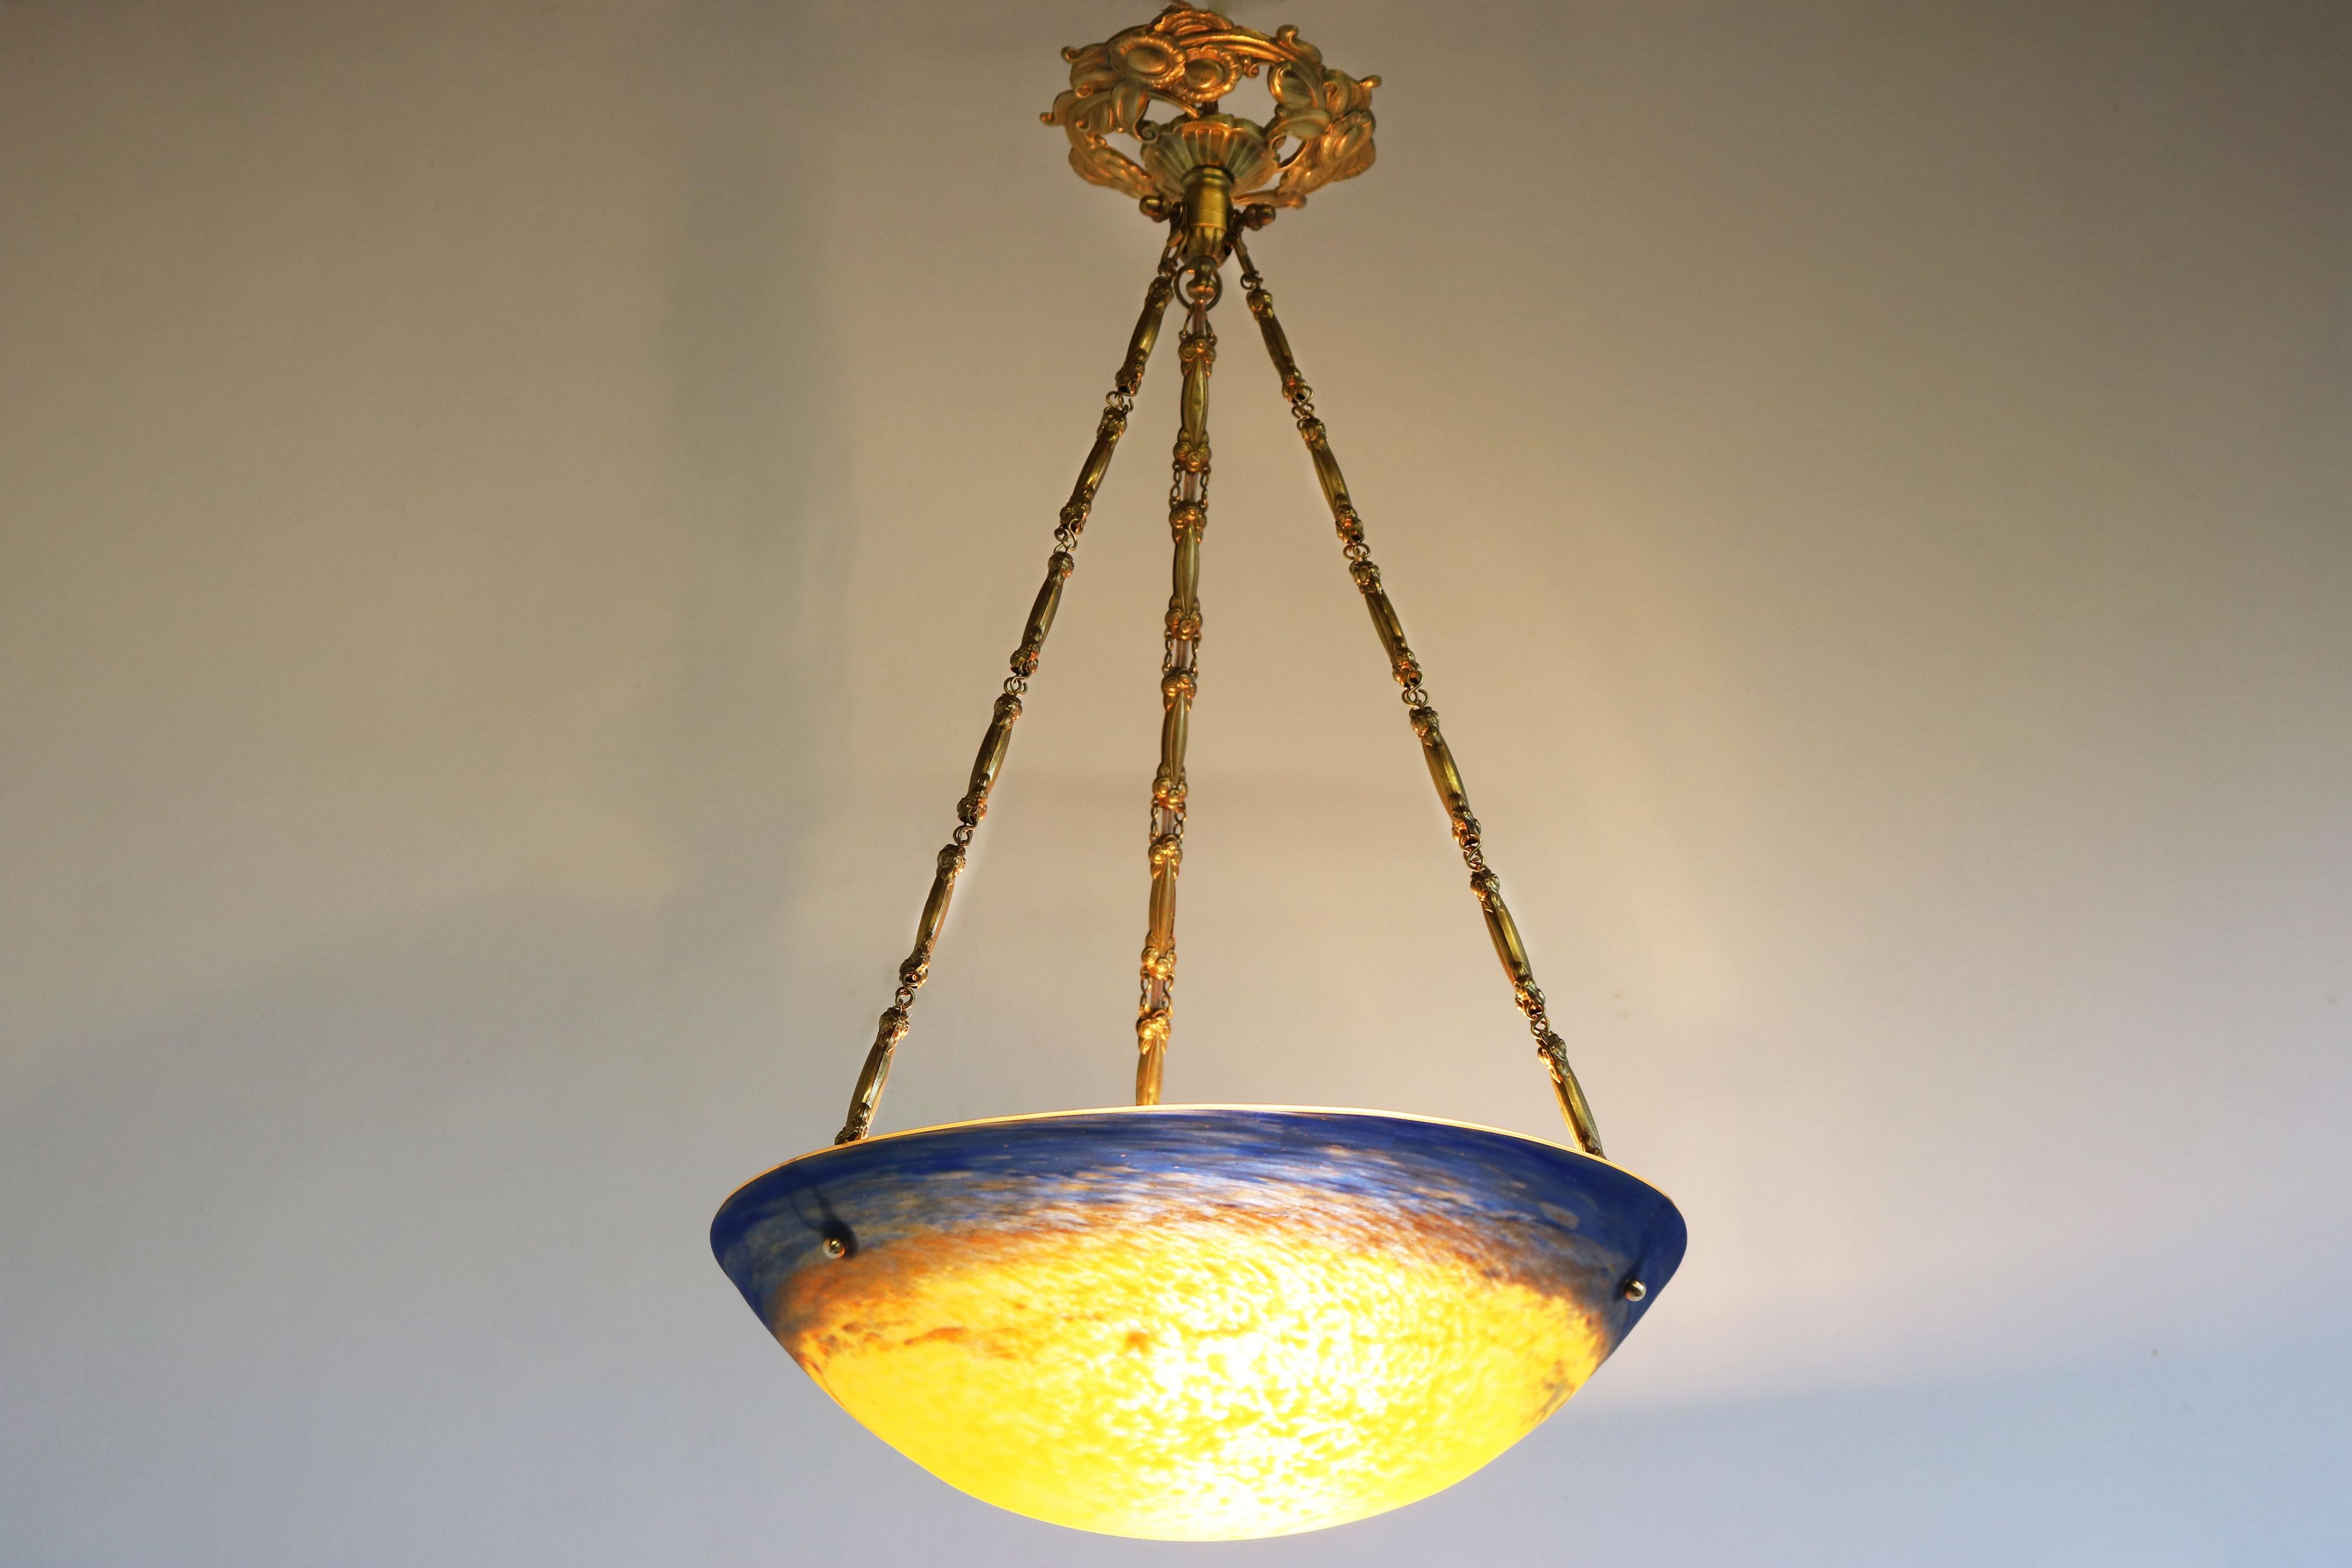 Simply stunning ! This French Art Deco / Art Nouveau ''Pâte de Verre'' chandelier by David Gueron Degue 1910-1920. Gorgeous model with the rare yellow/orange/blue colors & signed with degue. Matching bronze canopy with amazing floral details. This